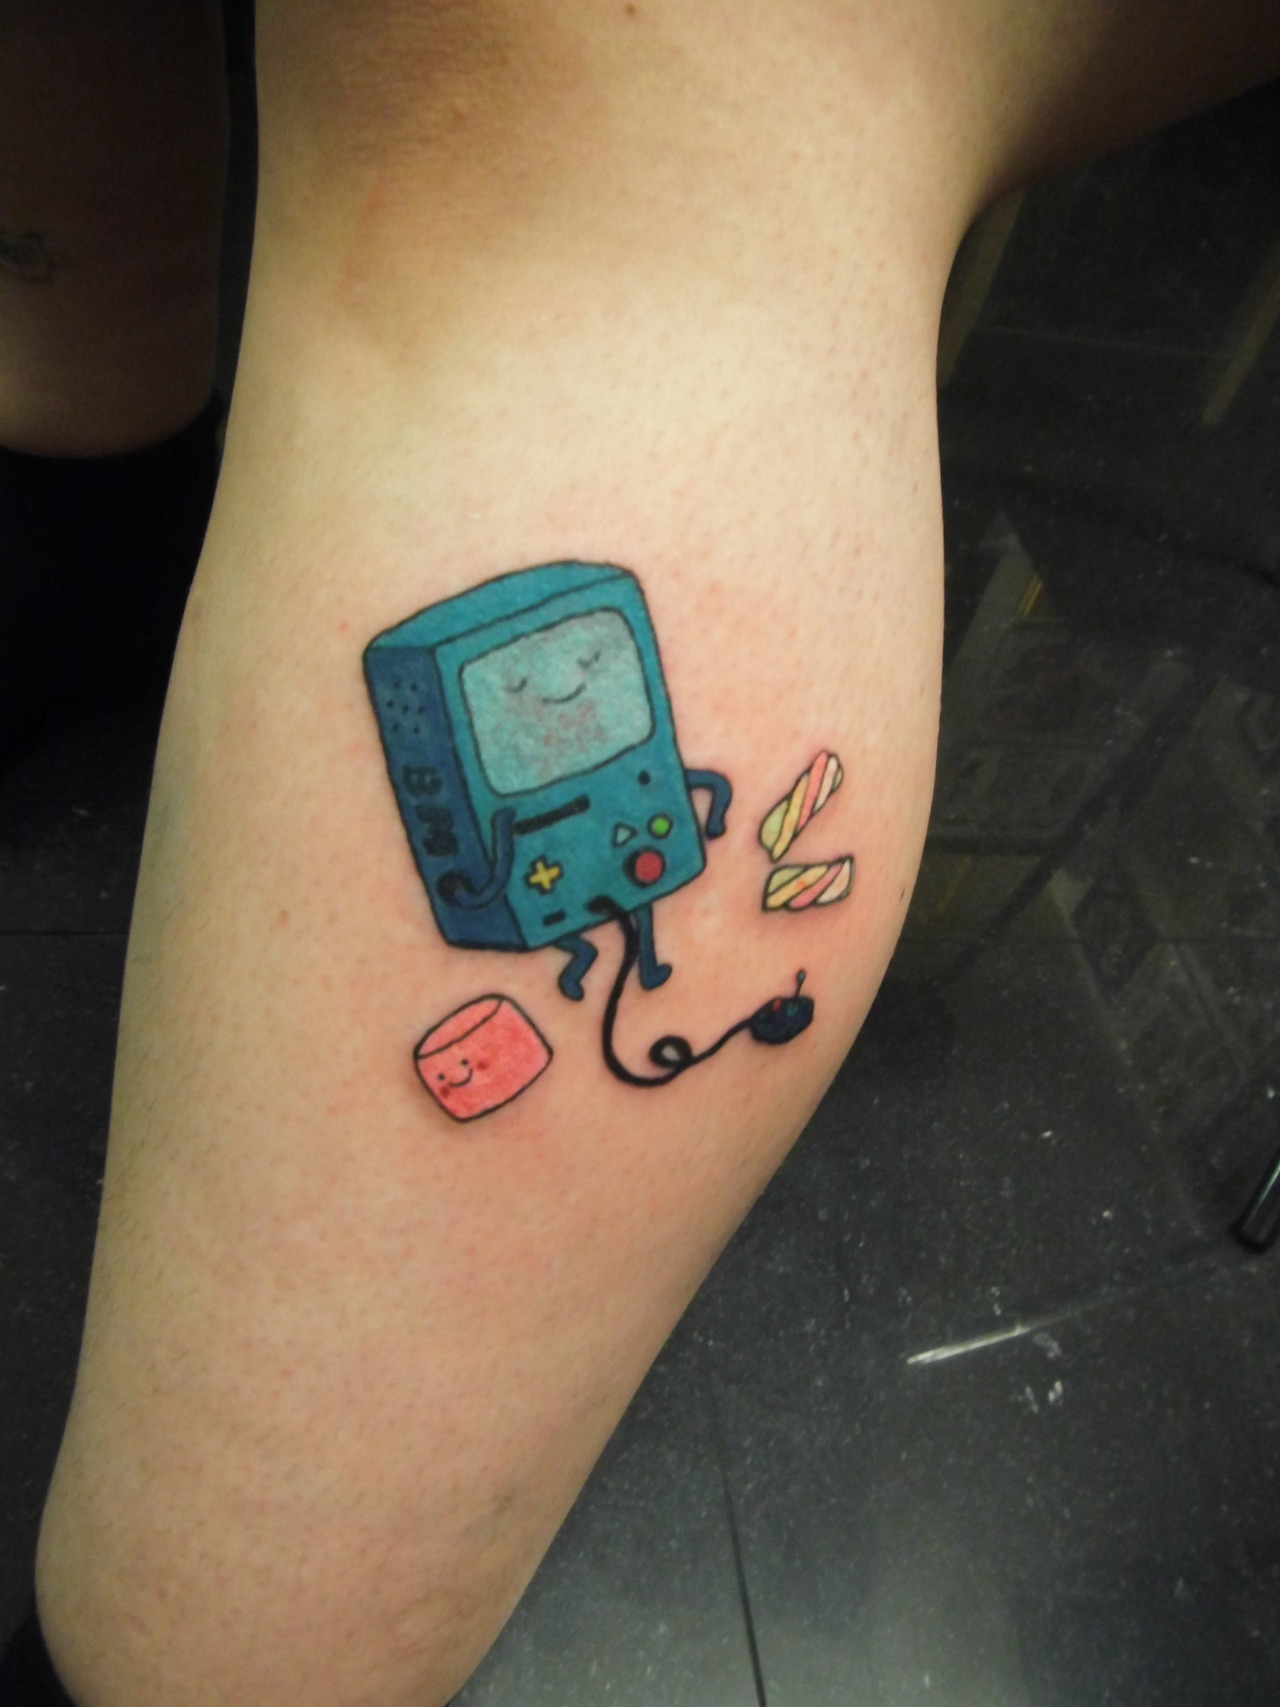 Sometimes you can still catch me dancing in it  Tattoo 25 BMO from Adventure  Time And of course